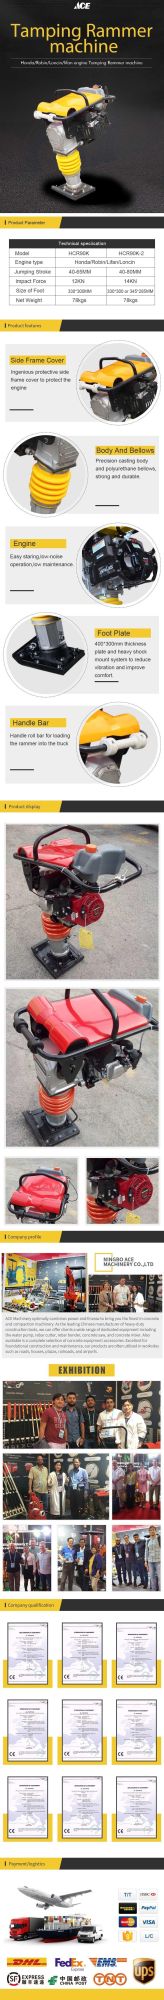 High Quality 5.5 HP Vibration Rammer Compactor Tamping Rammer Cheap Price